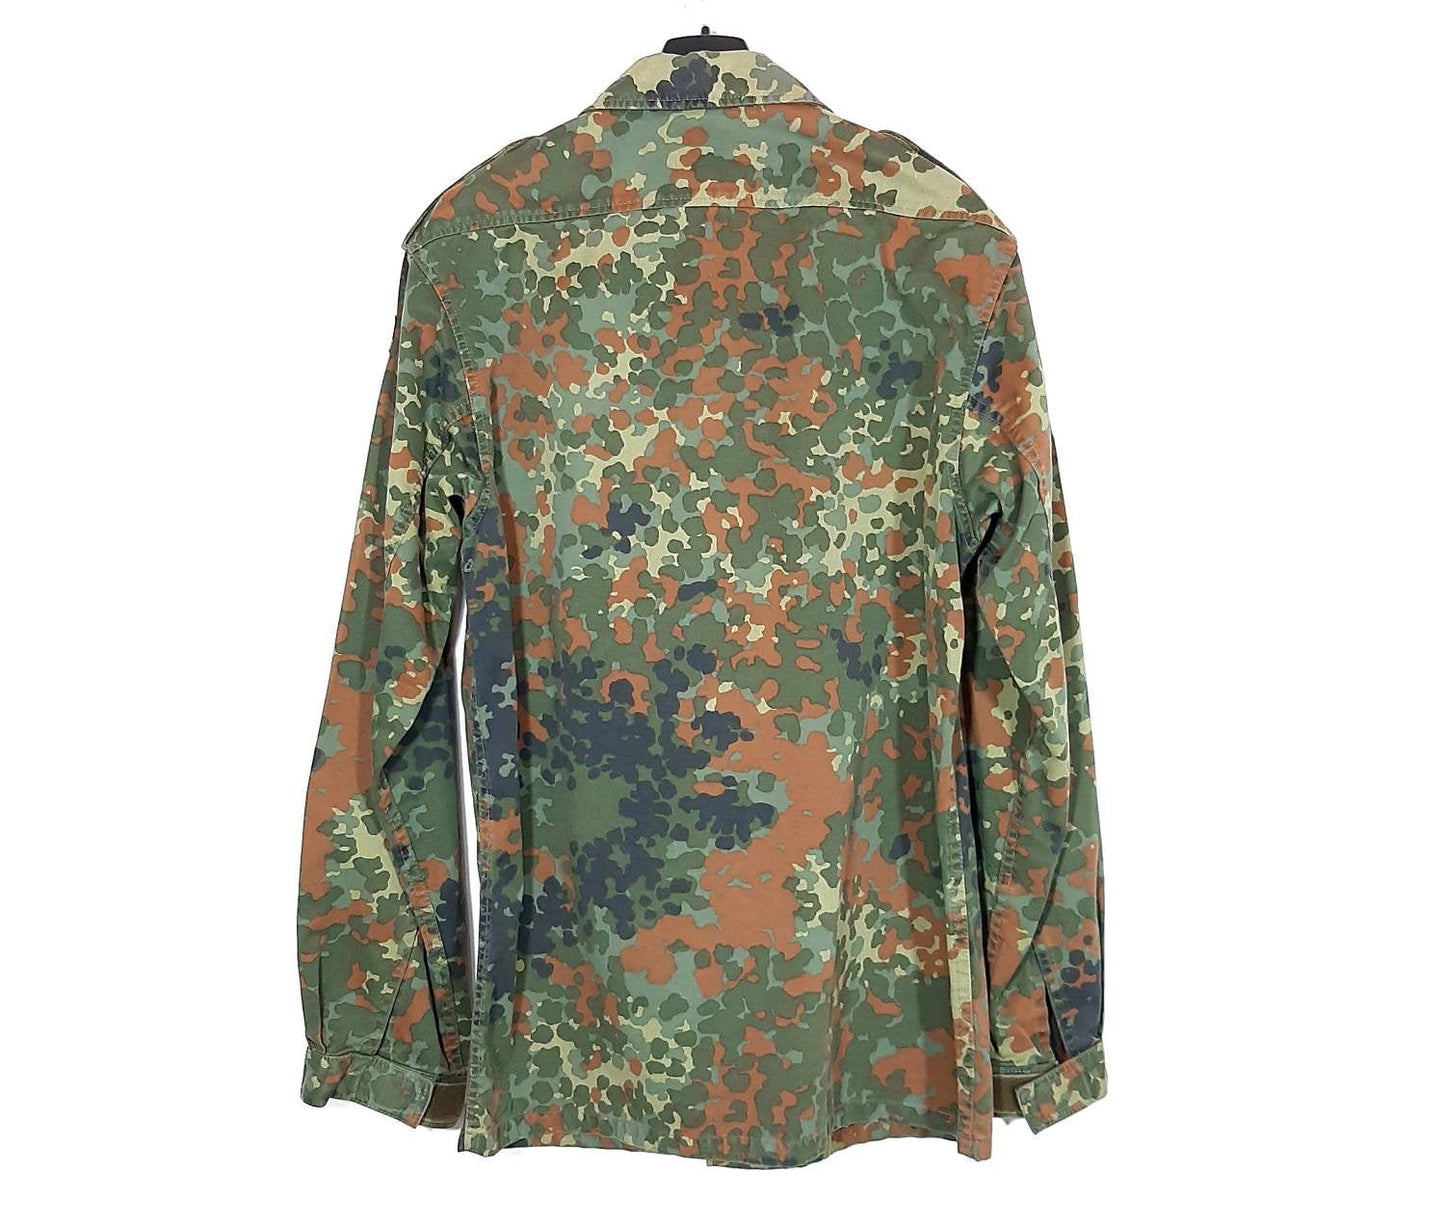 1970s German army woodland camo cotton canvas field jacket, mint condition